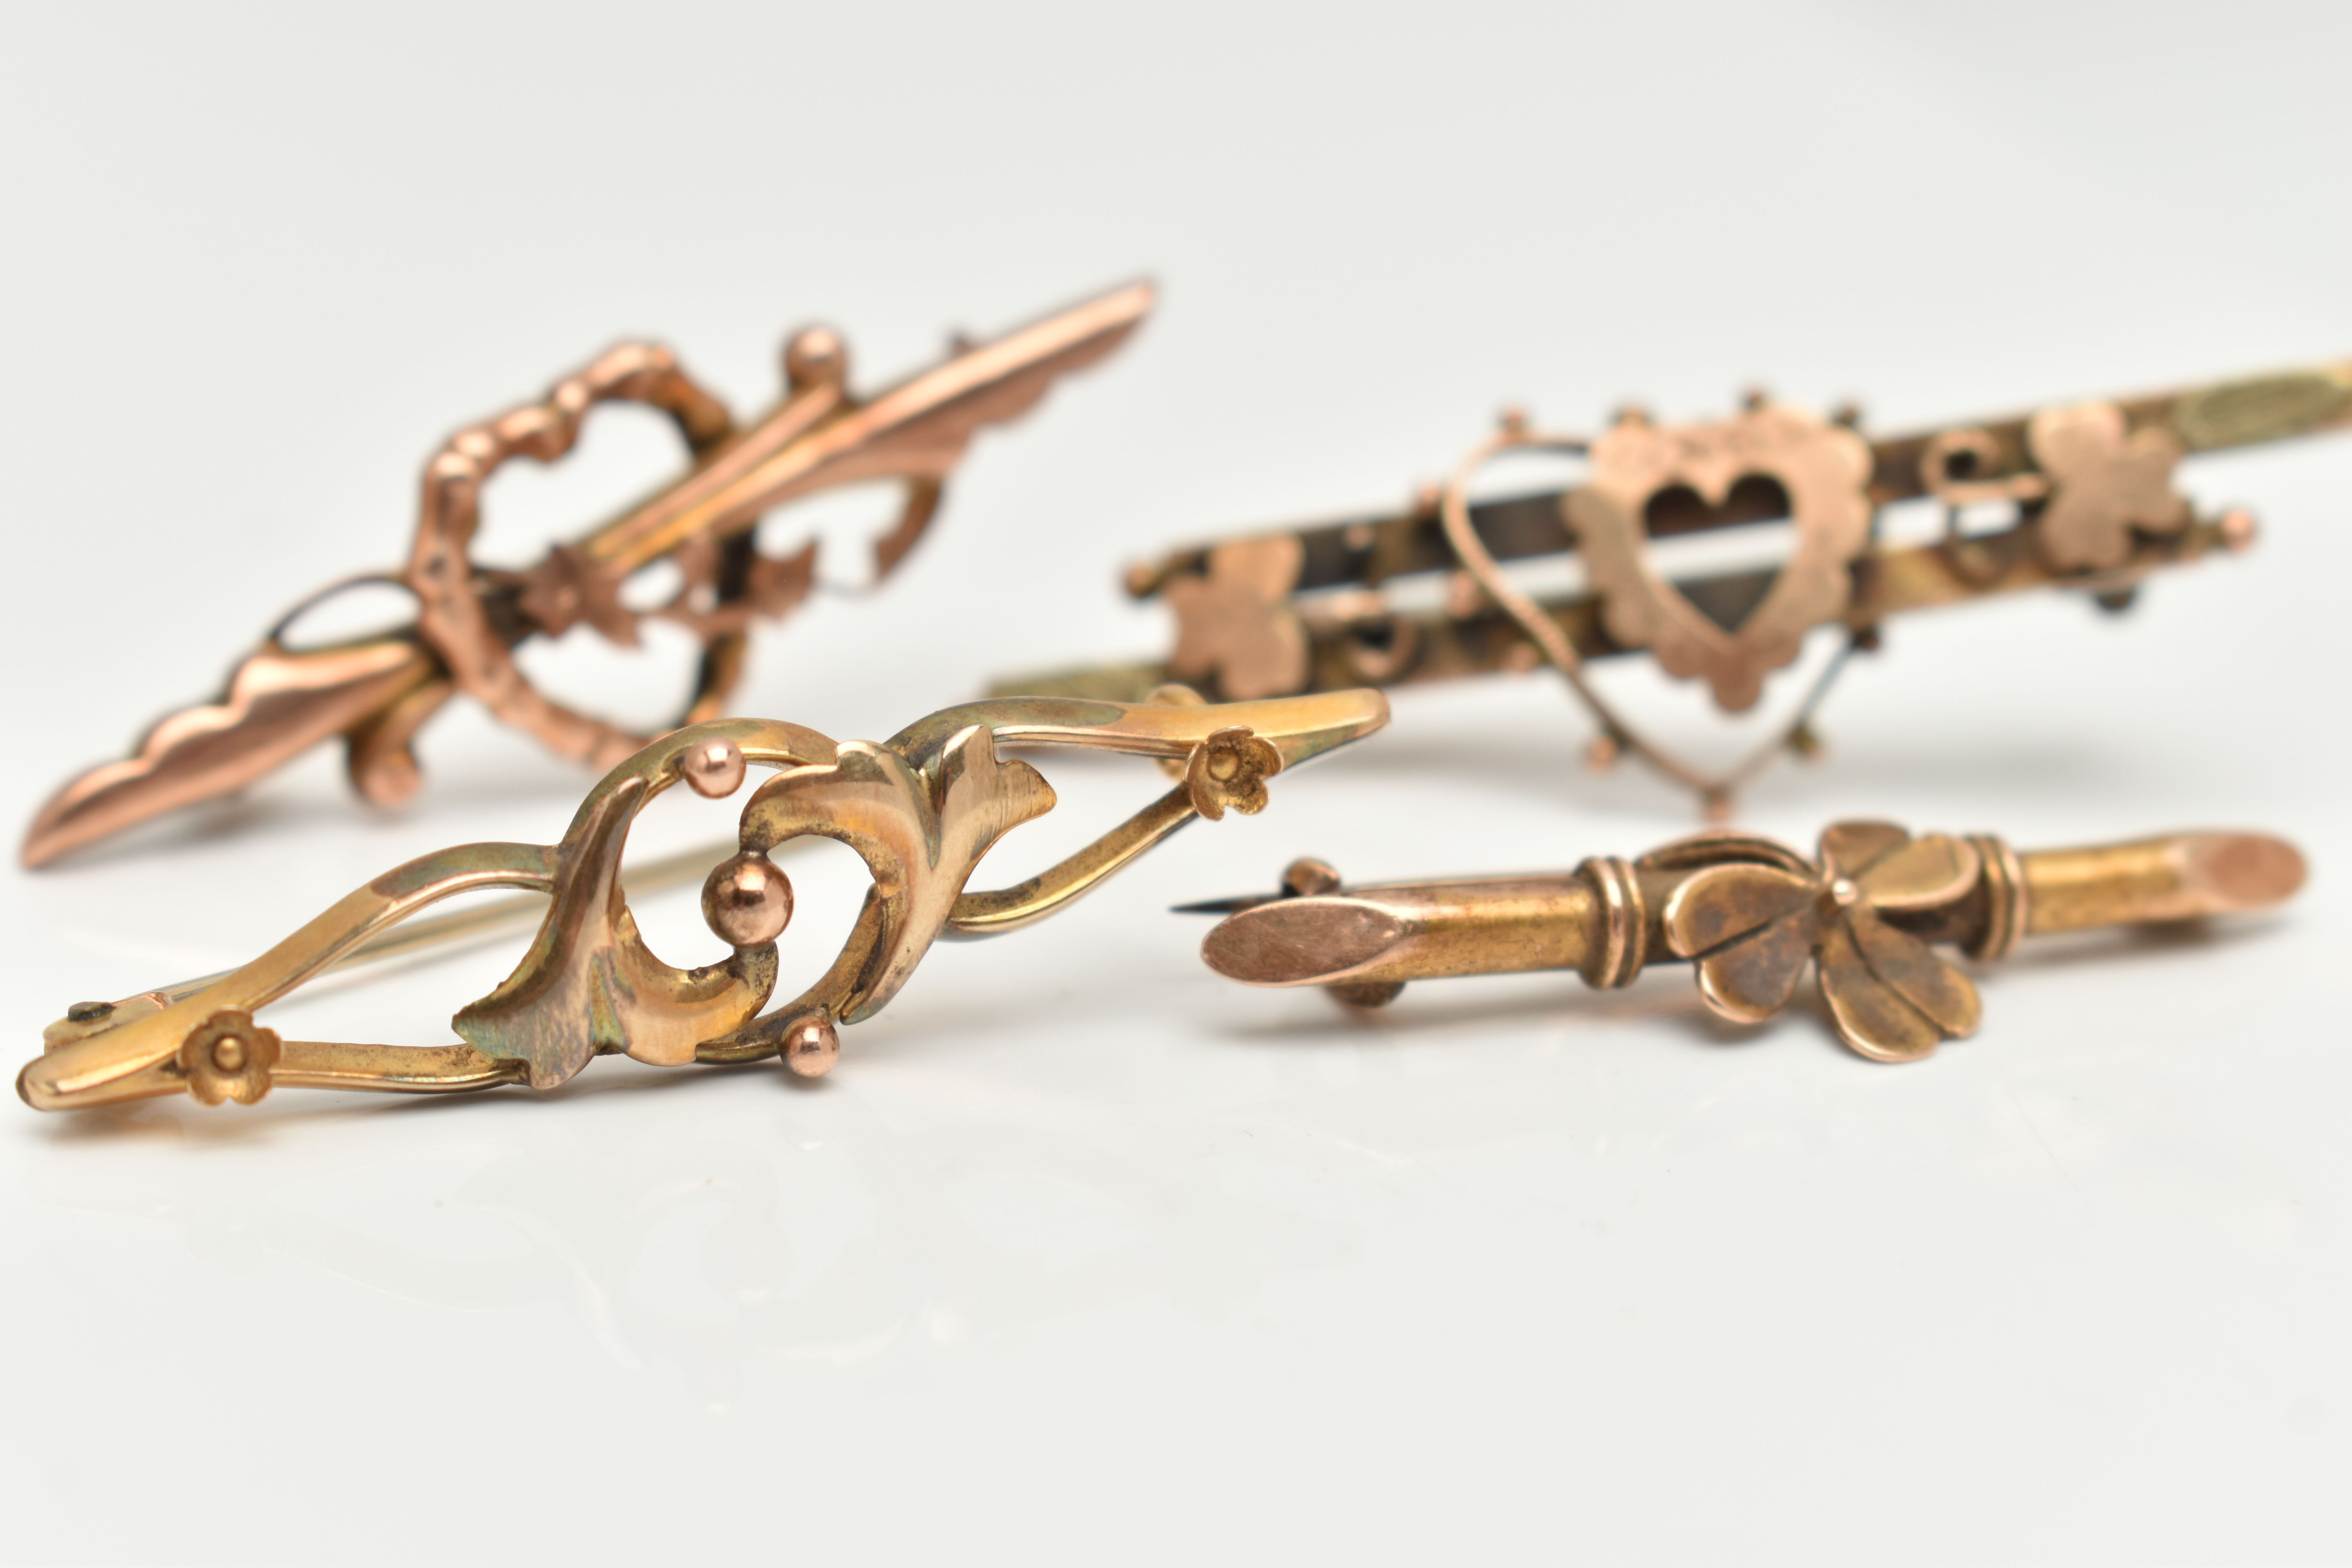 FOUR EARLY 20TH CENTURY BAR BROOCHES, the first a 9ct gold bar brooch with open heart detail, - Image 2 of 5